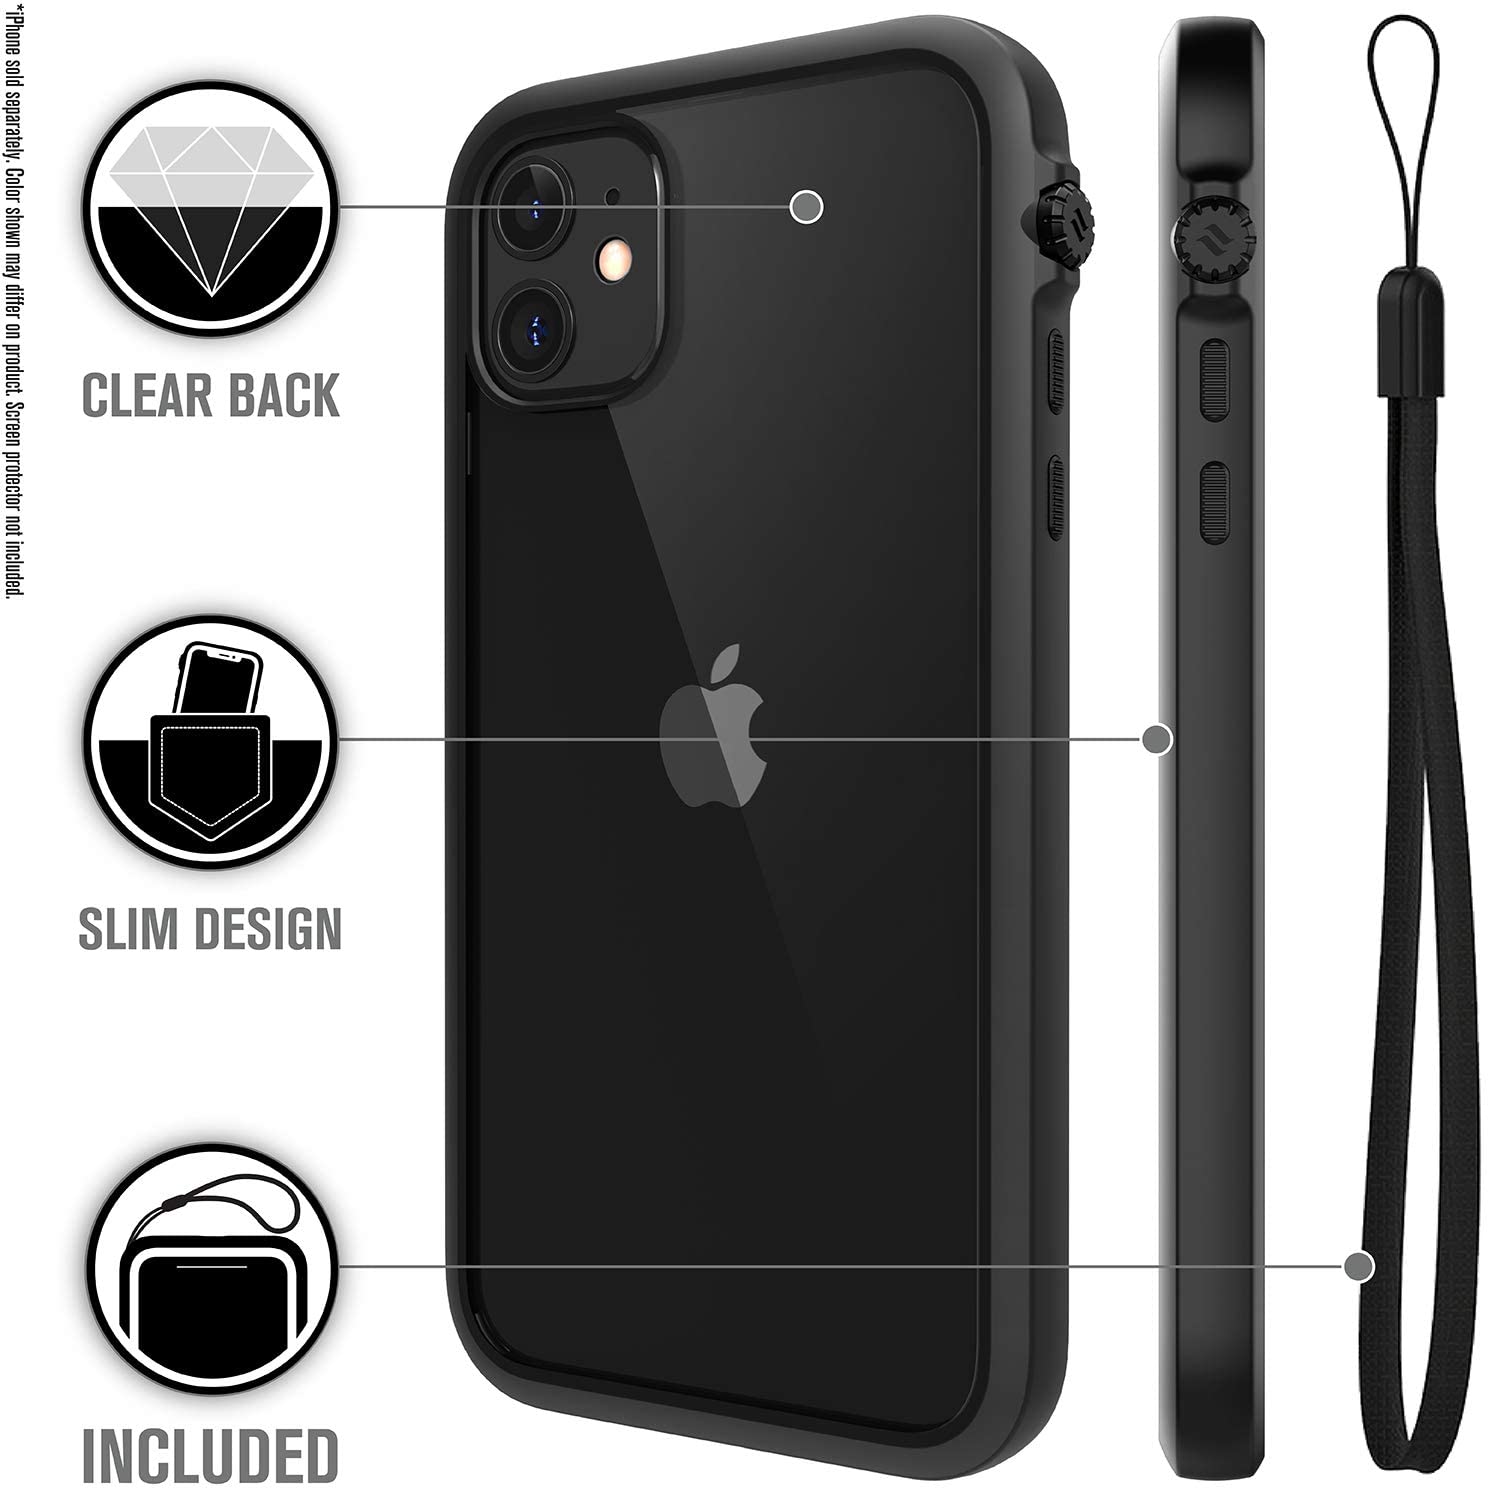 Case for iPhone 11 Case with Clear Back - e4cents